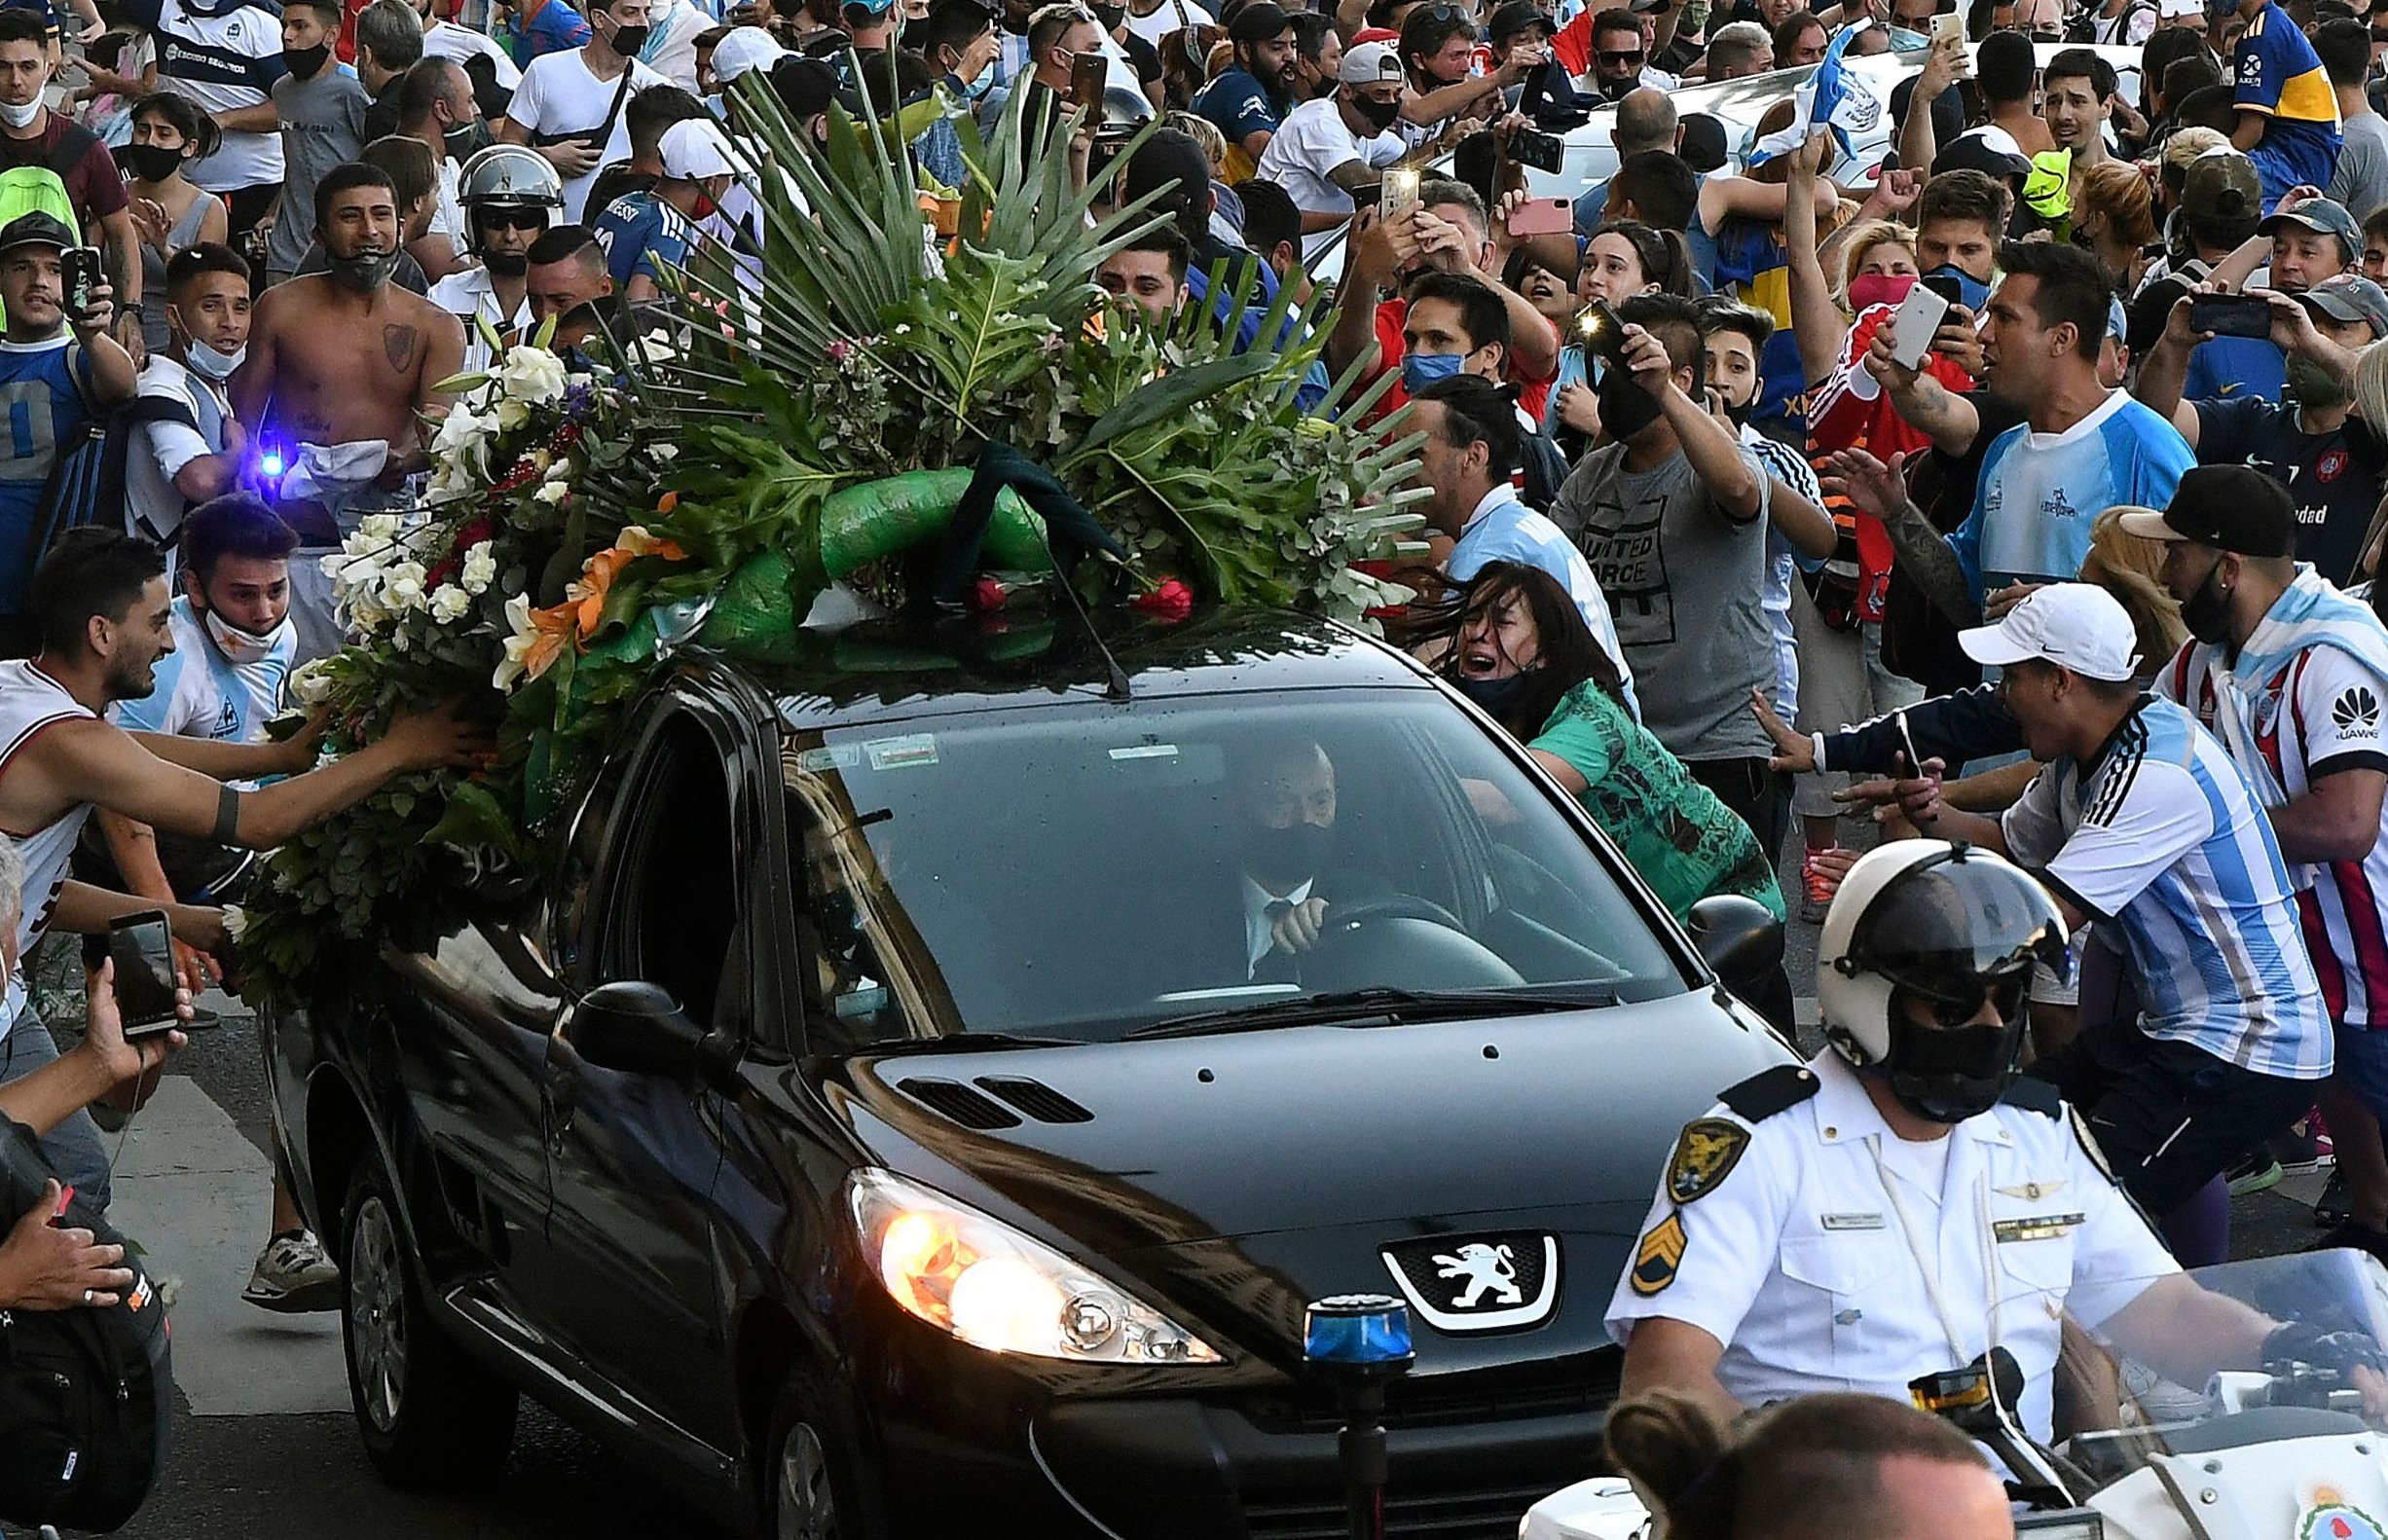 Photo released by Telam showing fans crowding next to the hearse carrying the late Argentine football legend Diego Armando Maradona while leaving Casa Rosada presidential palace to the cemetery, in Buenos Aires, Nov. 26, 2020. (Telam via AFP)